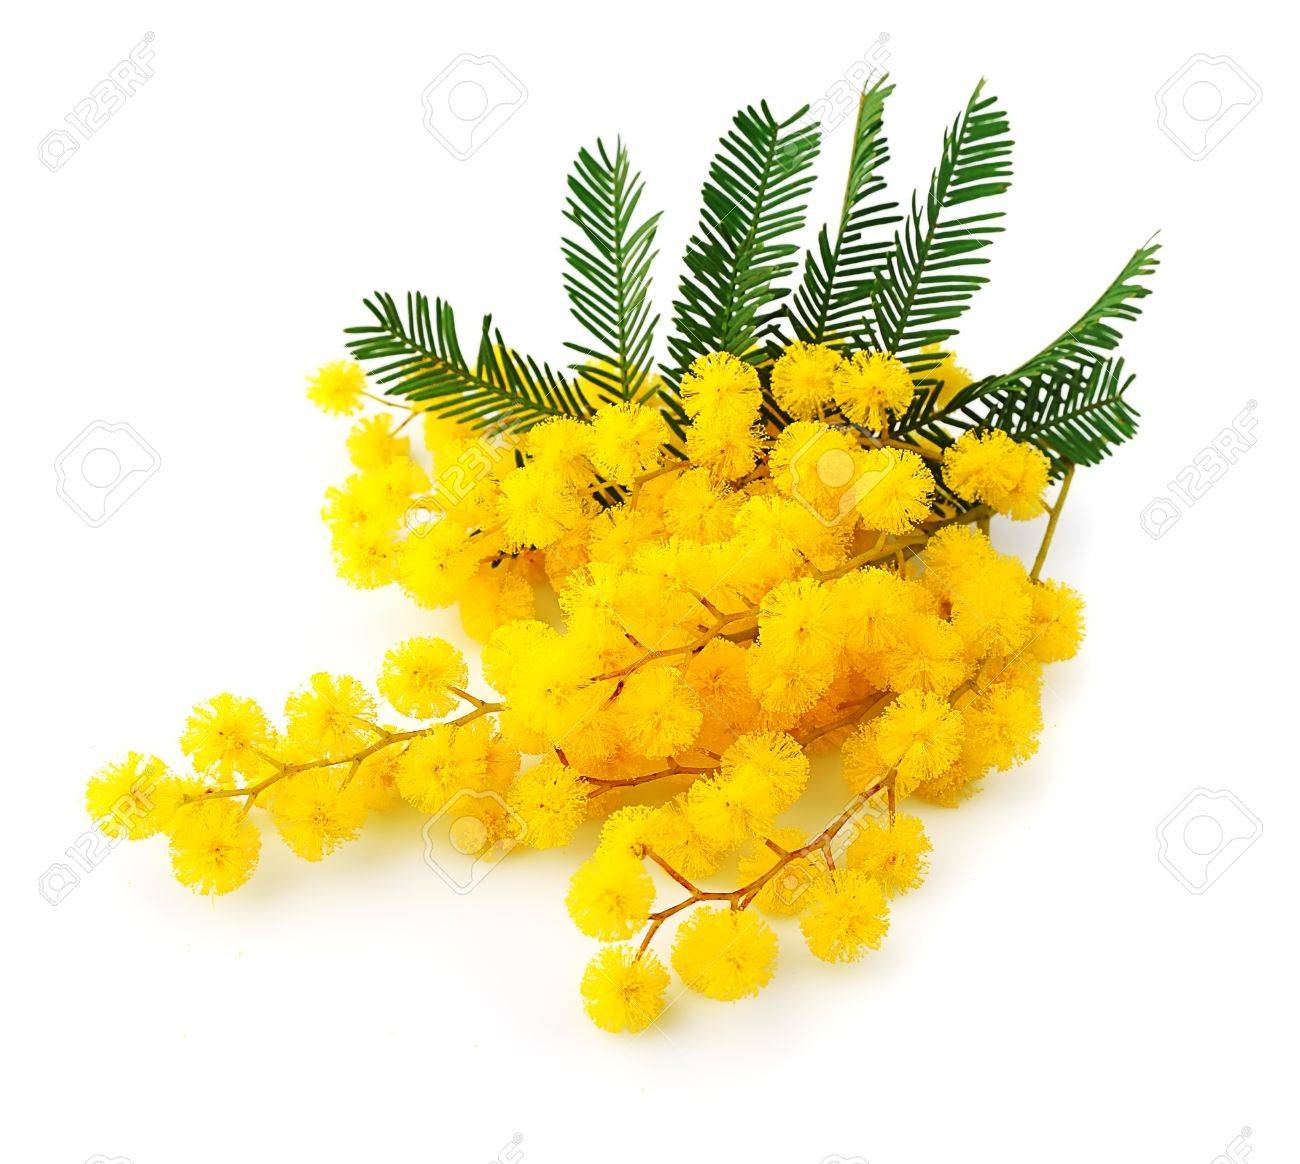 17995575-twig-of-mimosa-flowers-isolated-on-white-spring-flower.jpg